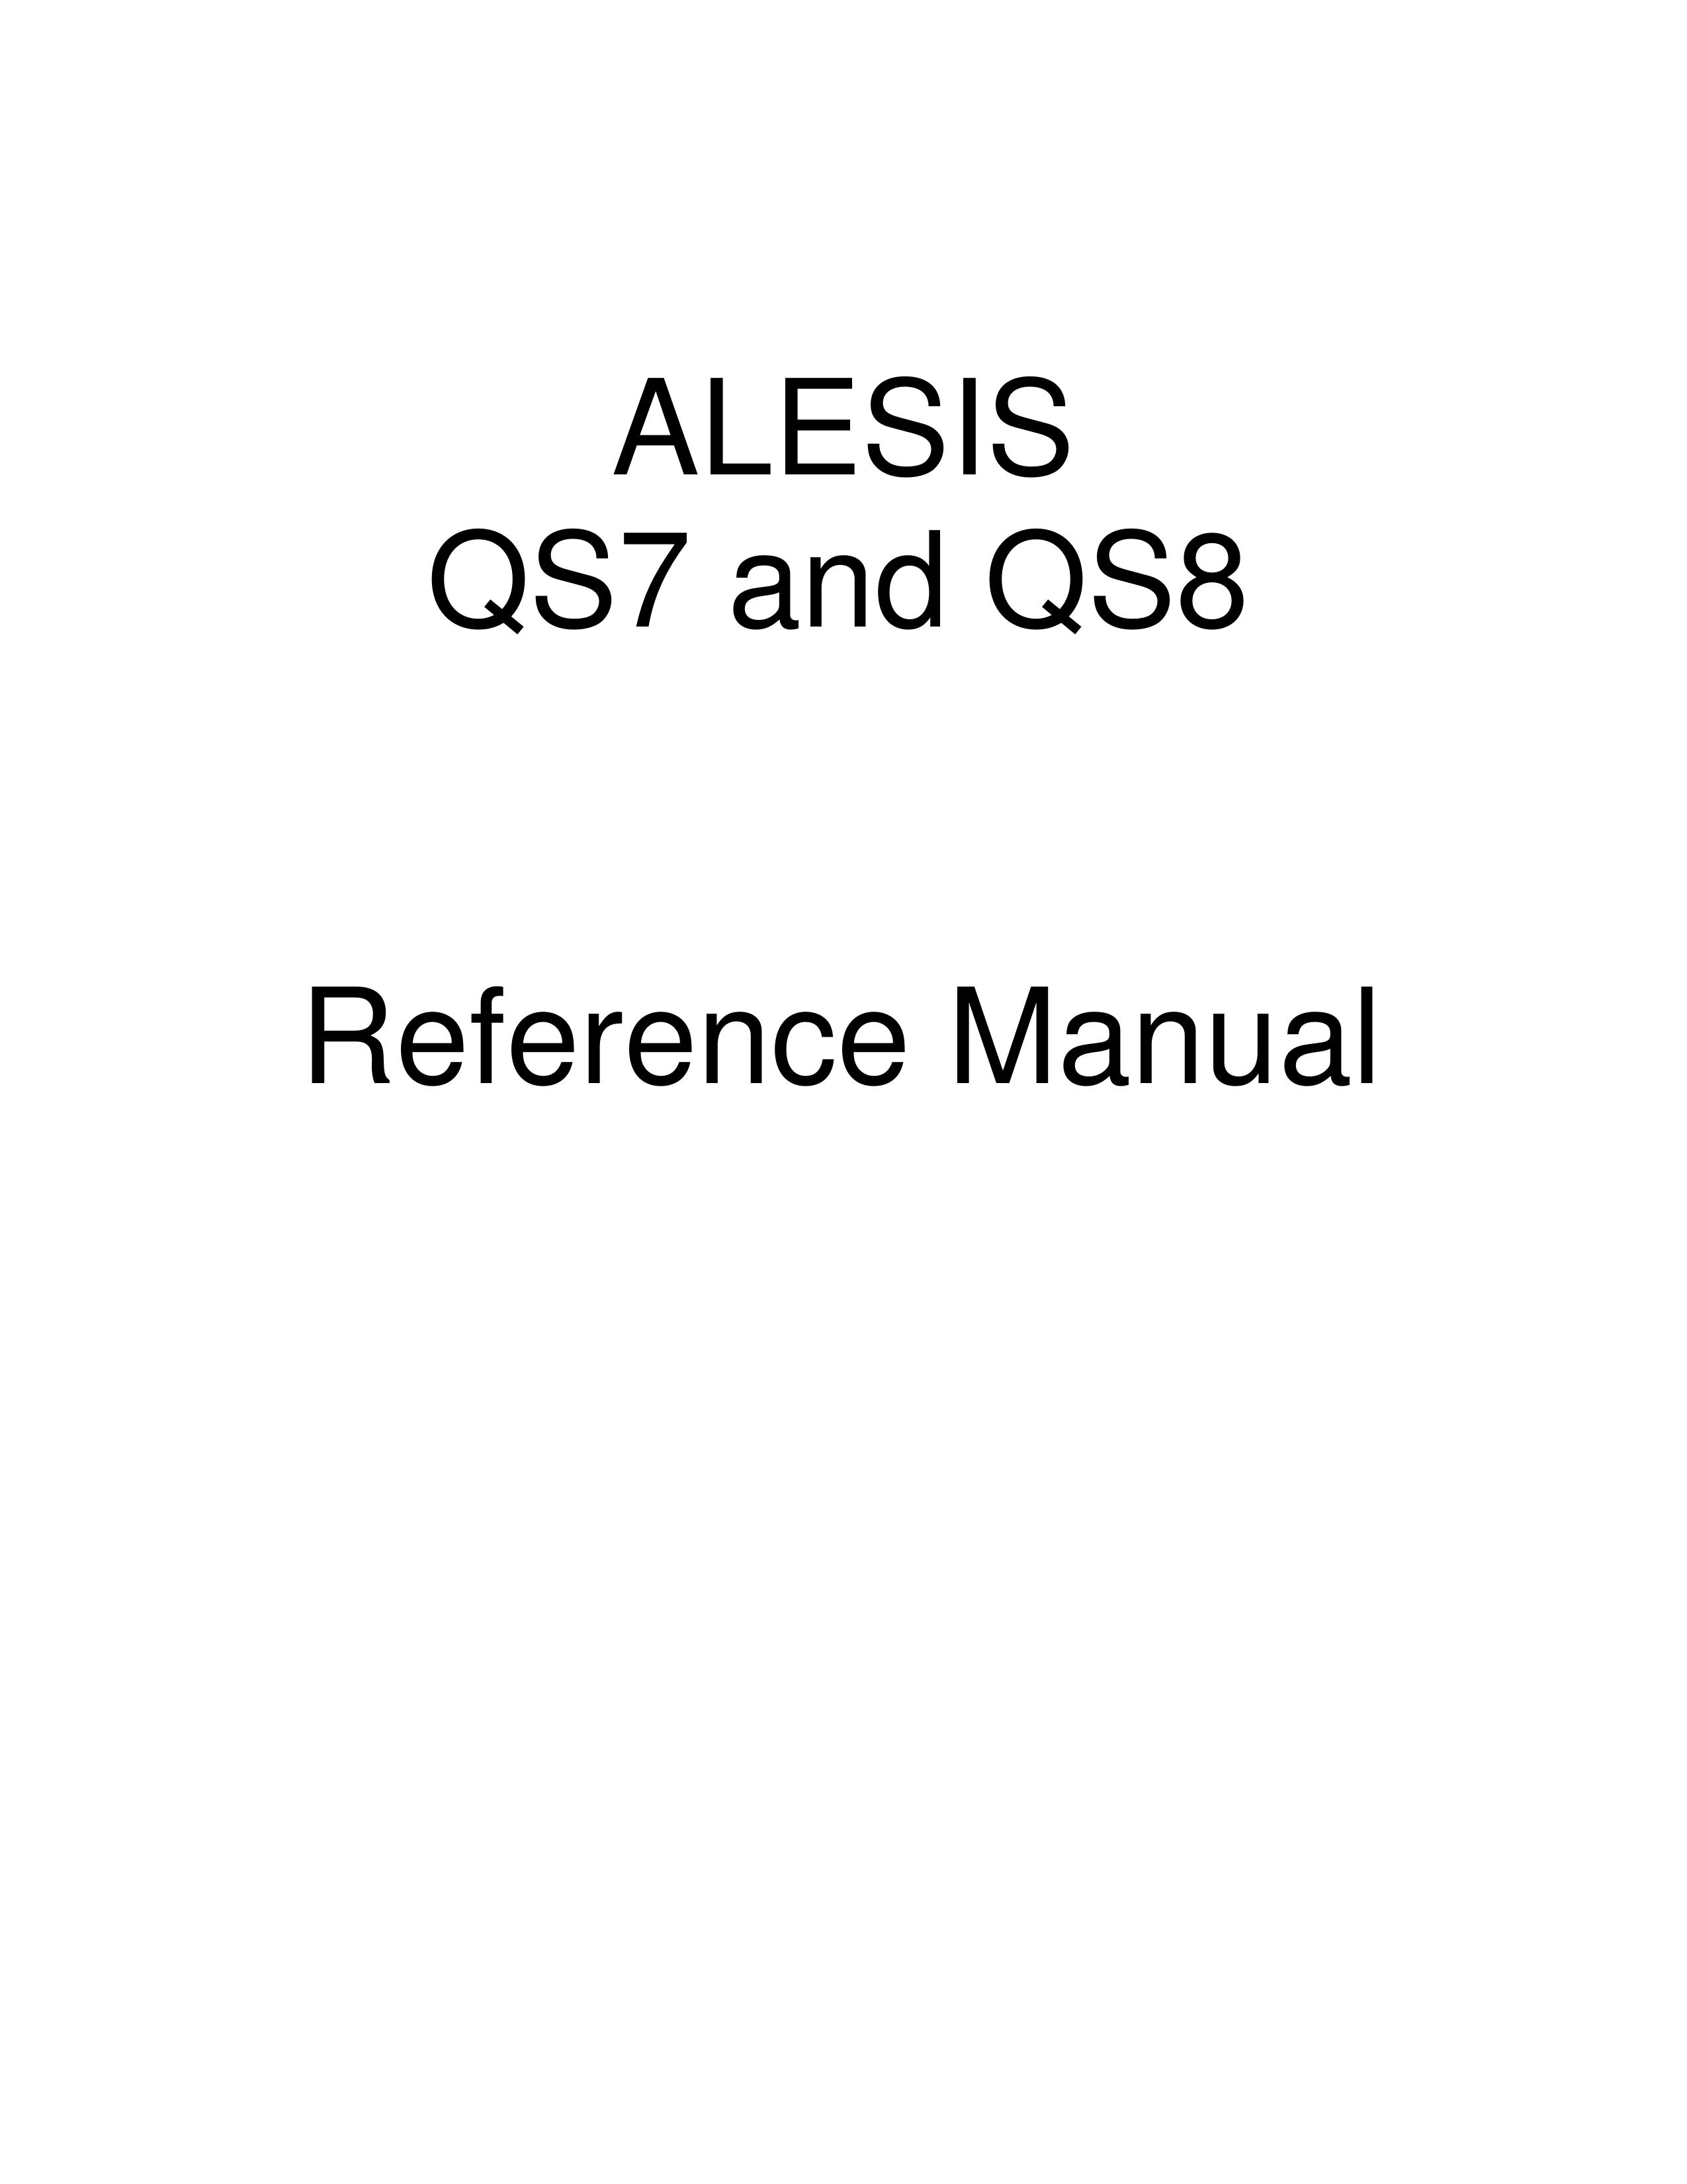 Alesis QS7 Musical Instrument User Manual (Page 1)